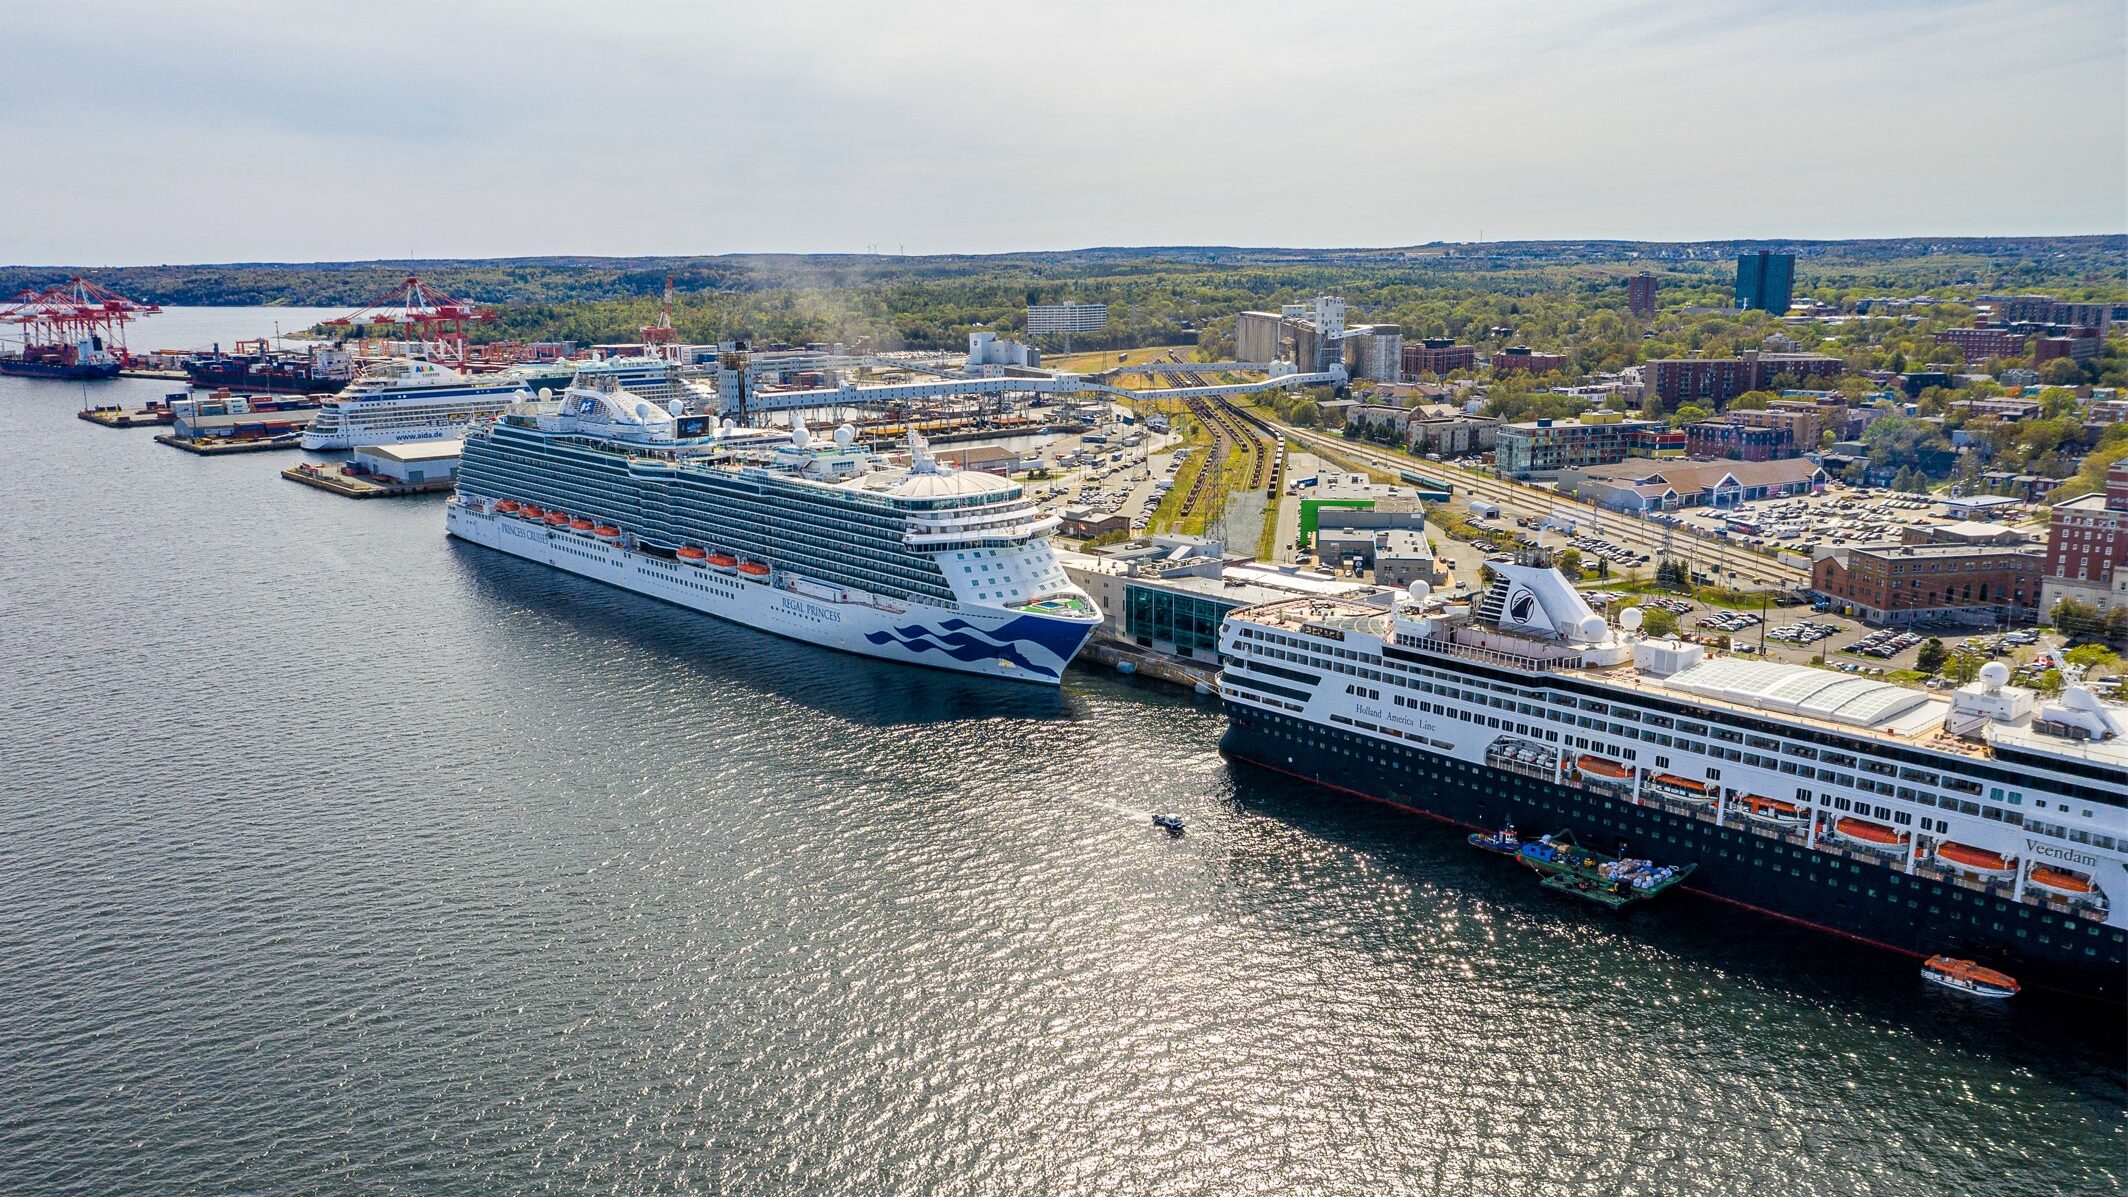 princess cruise ships in halifax harbour today